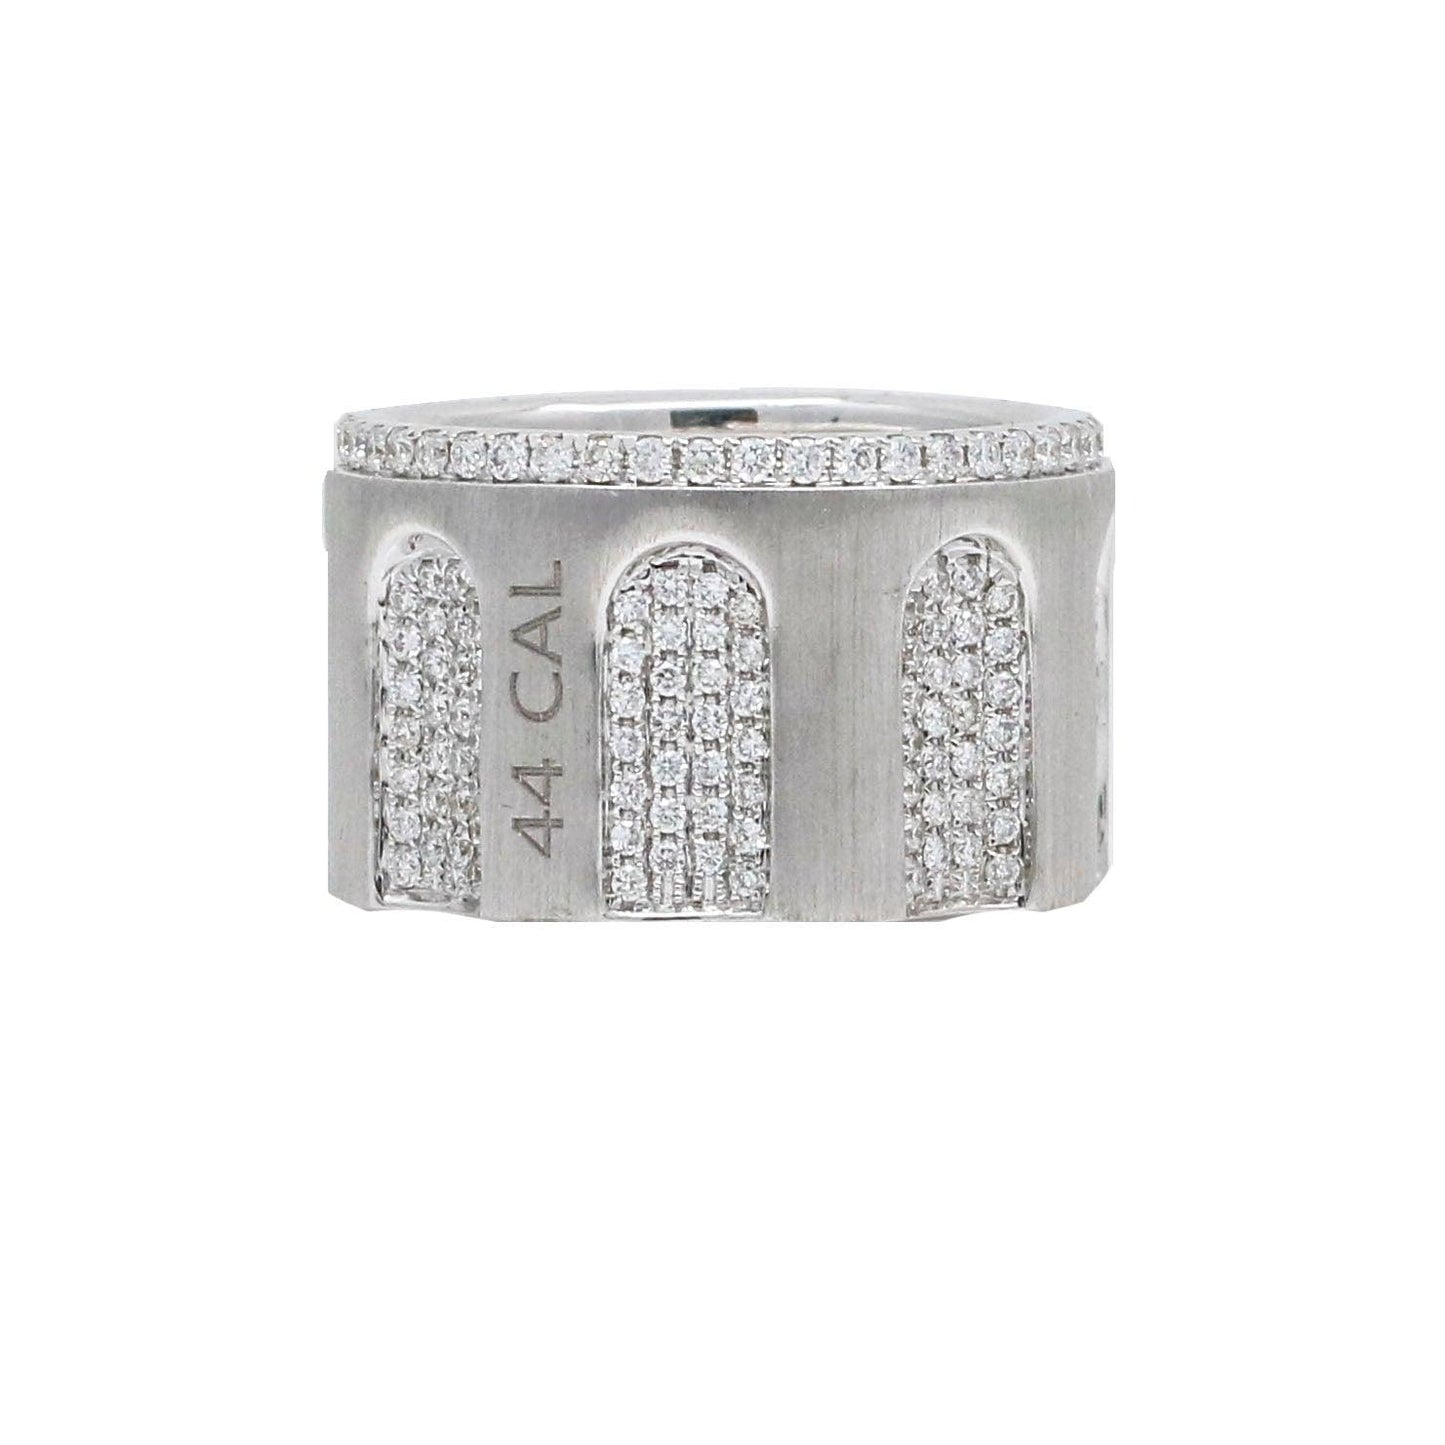 Caliber 44 Pave Diamond 14k White Gold Wide Band Ring (2.36 cttw) - 31 Jewels Inc.